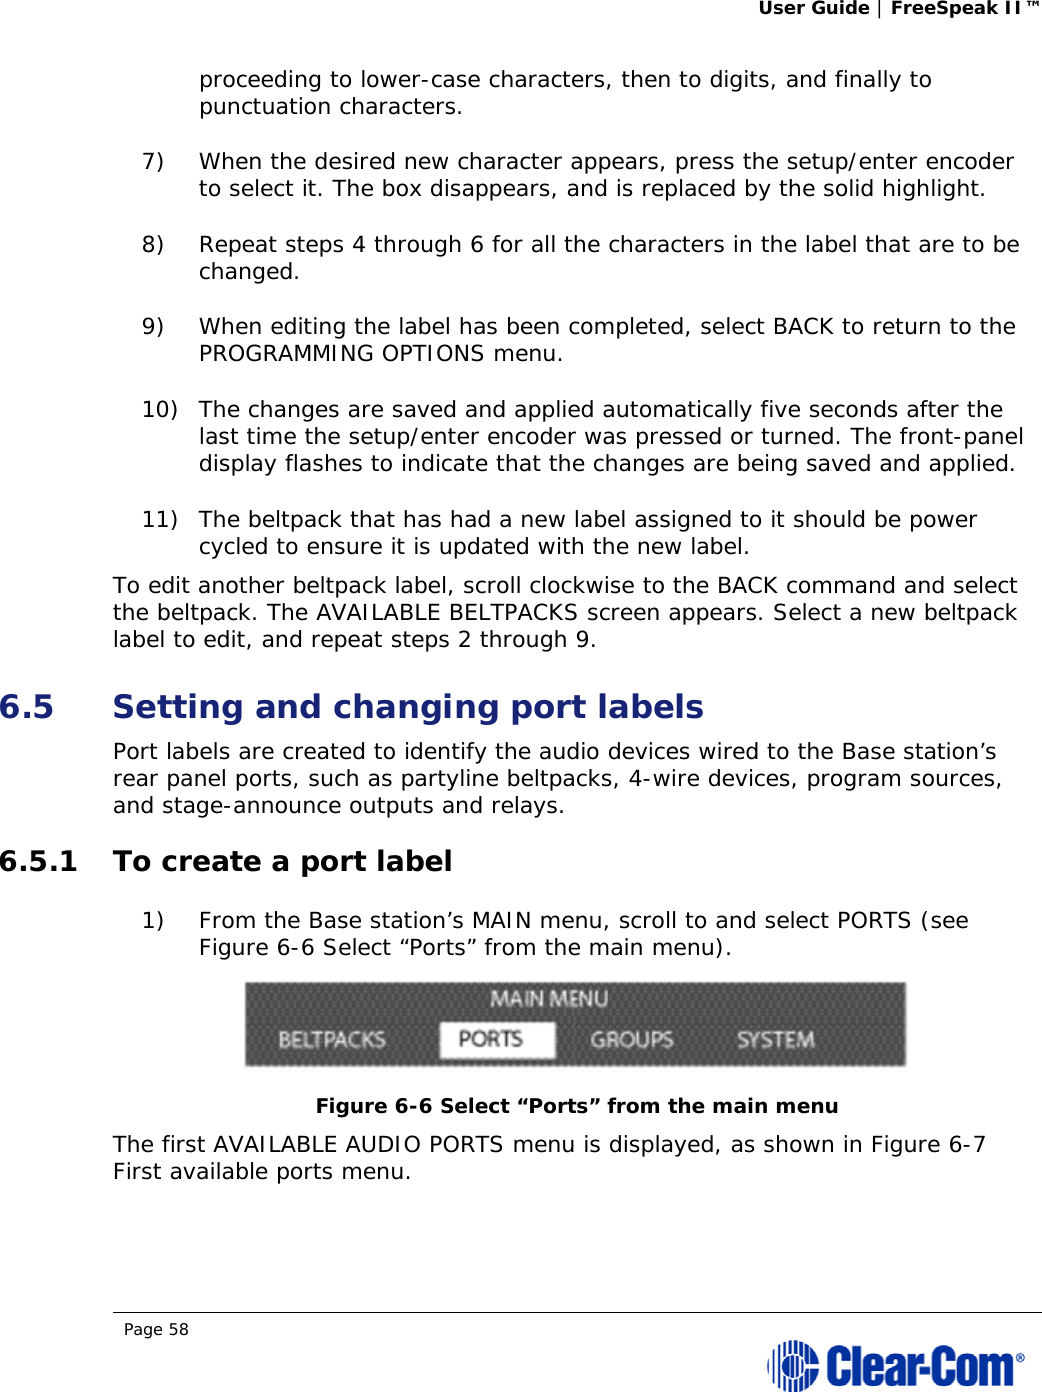 User Guide | FreeSpeak II™  Page 58  proceeding to lower-case characters, then to digits, and finally to punctuation characters.  7) When the desired new character appears, press the setup/enter encoder to select it. The box disappears, and is replaced by the solid highlight. 8) Repeat steps 4 through 6 for all the characters in the label that are to be changed.  9) When editing the label has been completed, select BACK to return to the PROGRAMMING OPTIONS menu.  10) The changes are saved and applied automatically five seconds after the last time the setup/enter encoder was pressed or turned. The front-panel display flashes to indicate that the changes are being saved and applied. 11) The beltpack that has had a new label assigned to it should be power cycled to ensure it is updated with the new label. To edit another beltpack label, scroll clockwise to the BACK command and select the beltpack. The AVAILABLE BELTPACKS screen appears. Select a new beltpack label to edit, and repeat steps 2 through 9. 6.5 Setting and changing port labels Port labels are created to identify the audio devices wired to the Base station’s rear panel ports, such as partyline beltpacks, 4-wire devices, program sources, and stage-announce outputs and relays. 6.5.1 To create a port label 1) From the Base station’s MAIN menu, scroll to and select PORTS (see Figure 6-6 Select “Ports” from the main menu).  Figure 6-6 Select “Ports” from the main menu The first AVAILABLE AUDIO PORTS menu is displayed, as shown in Figure 6-7 First available ports menu.  